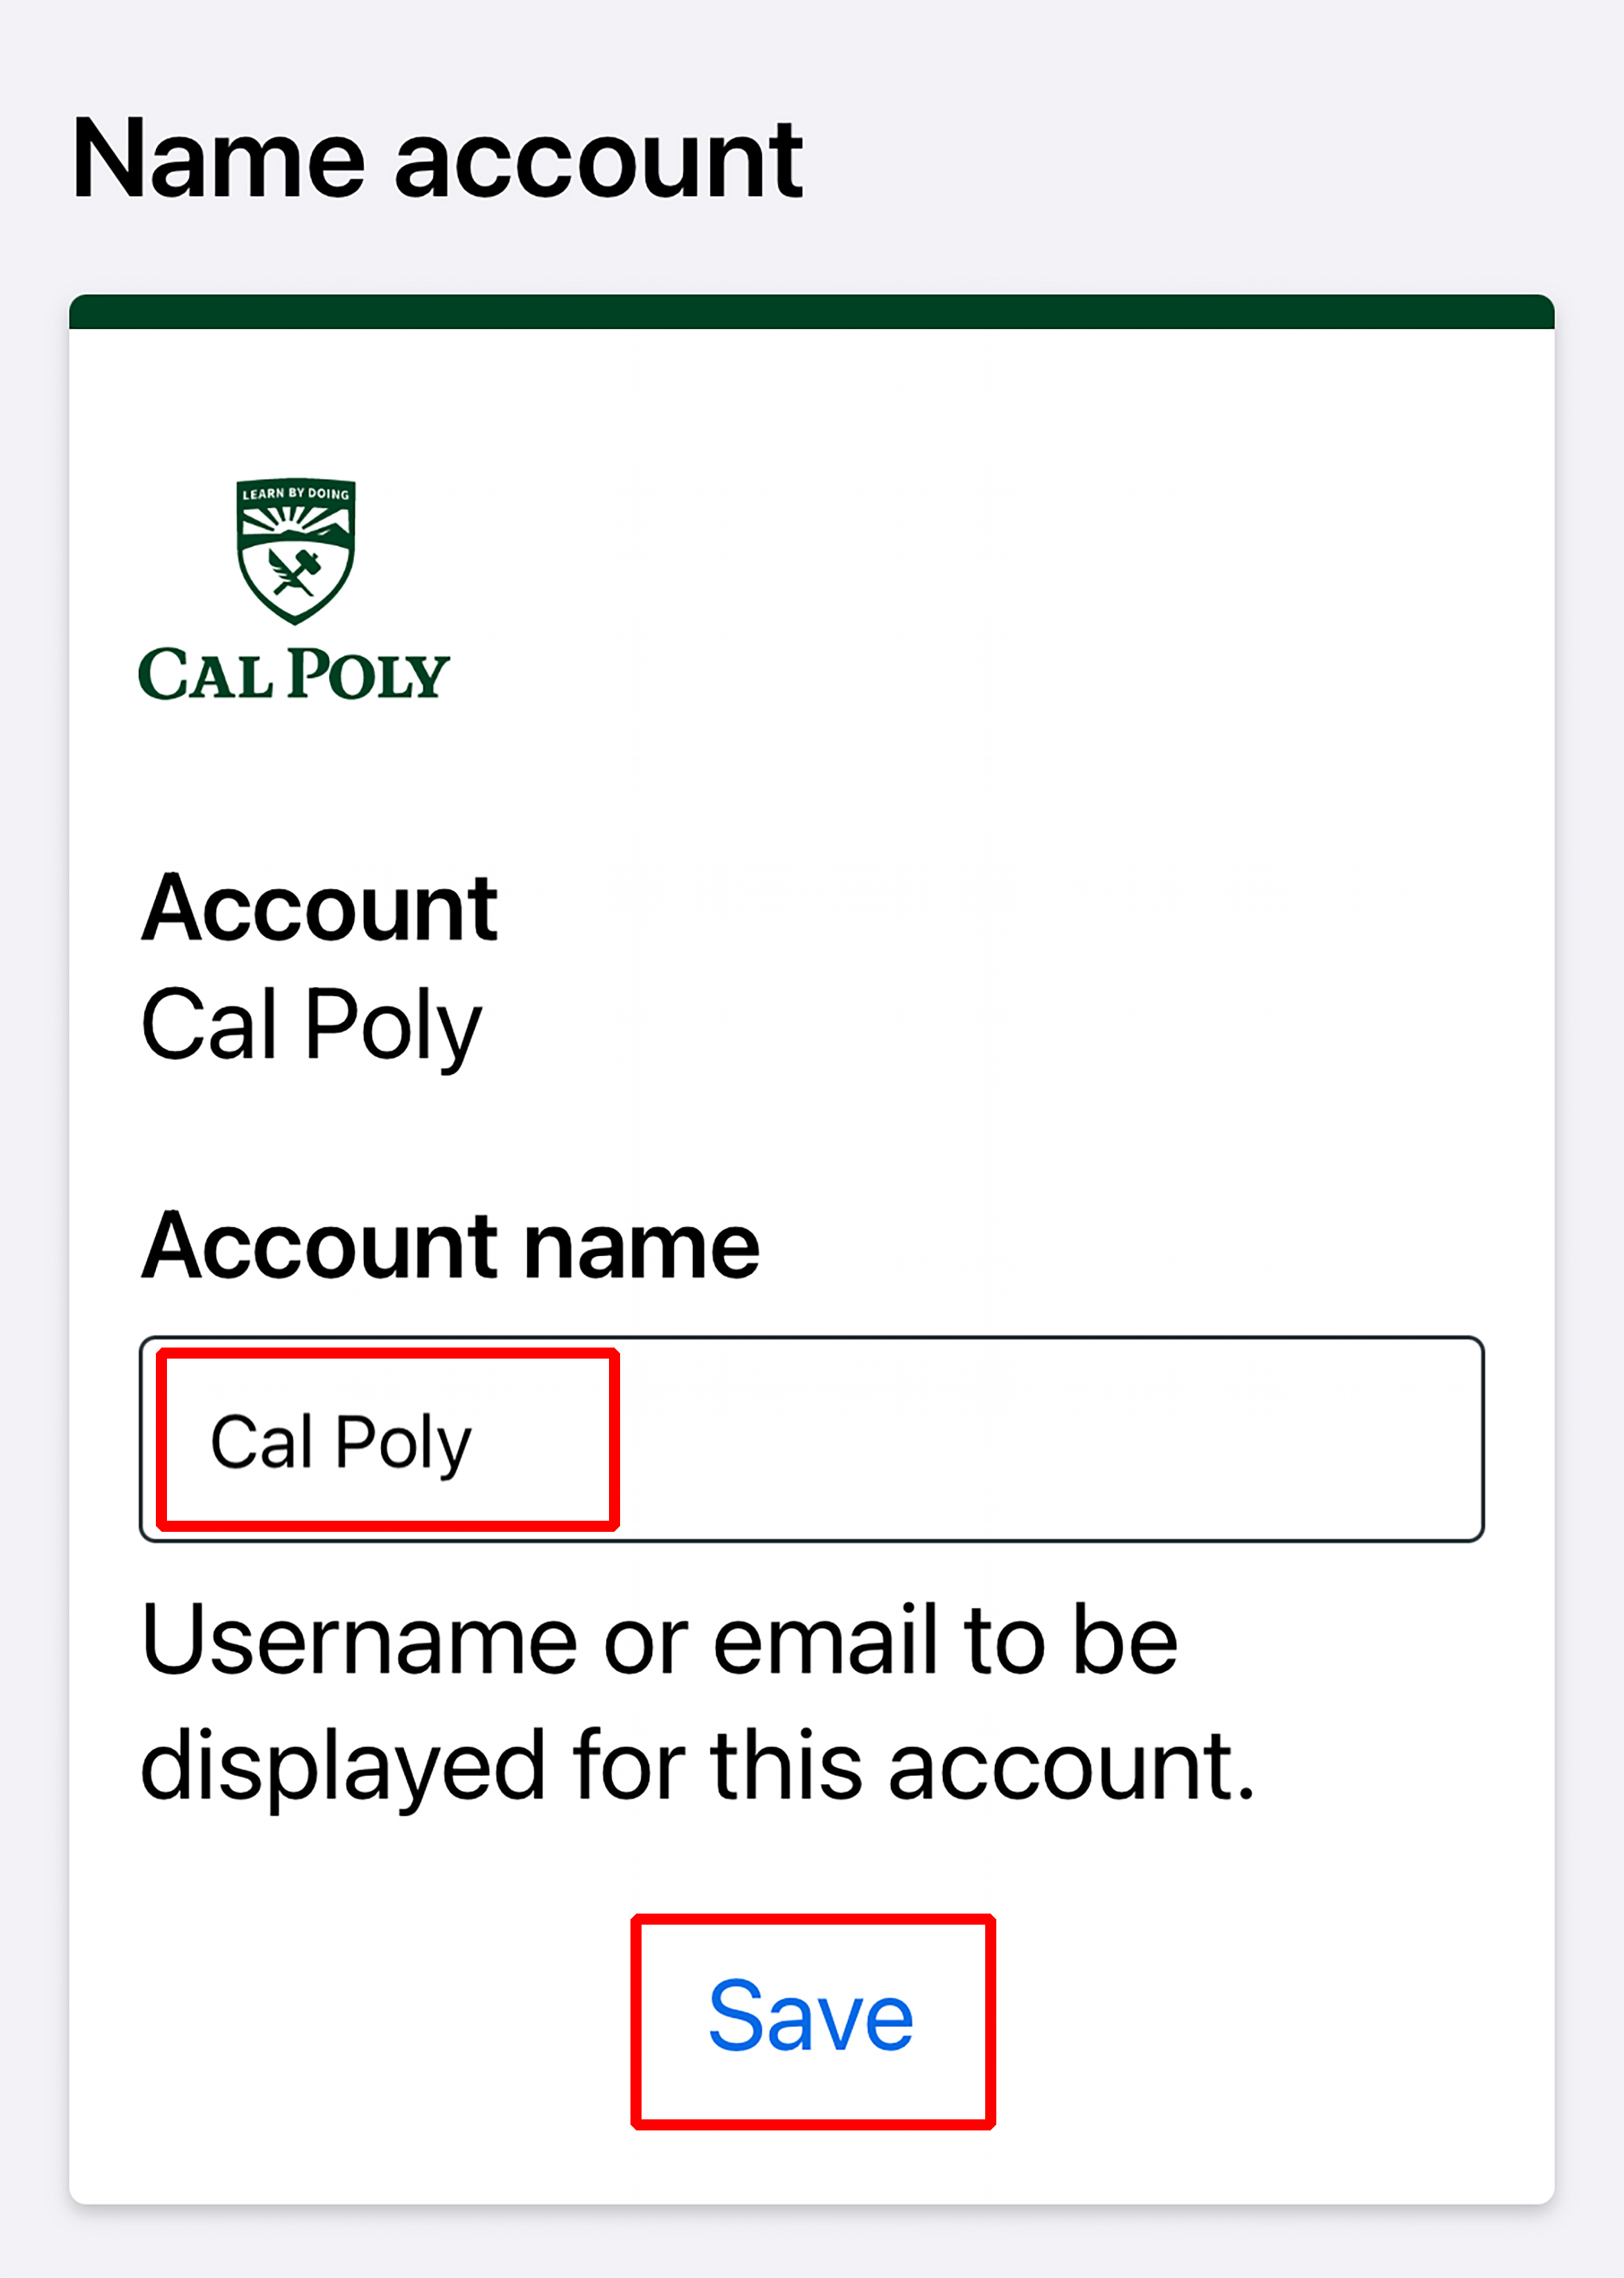 Account name text field shown with Cal Poly typed and highlighted. Save button also highlighted.